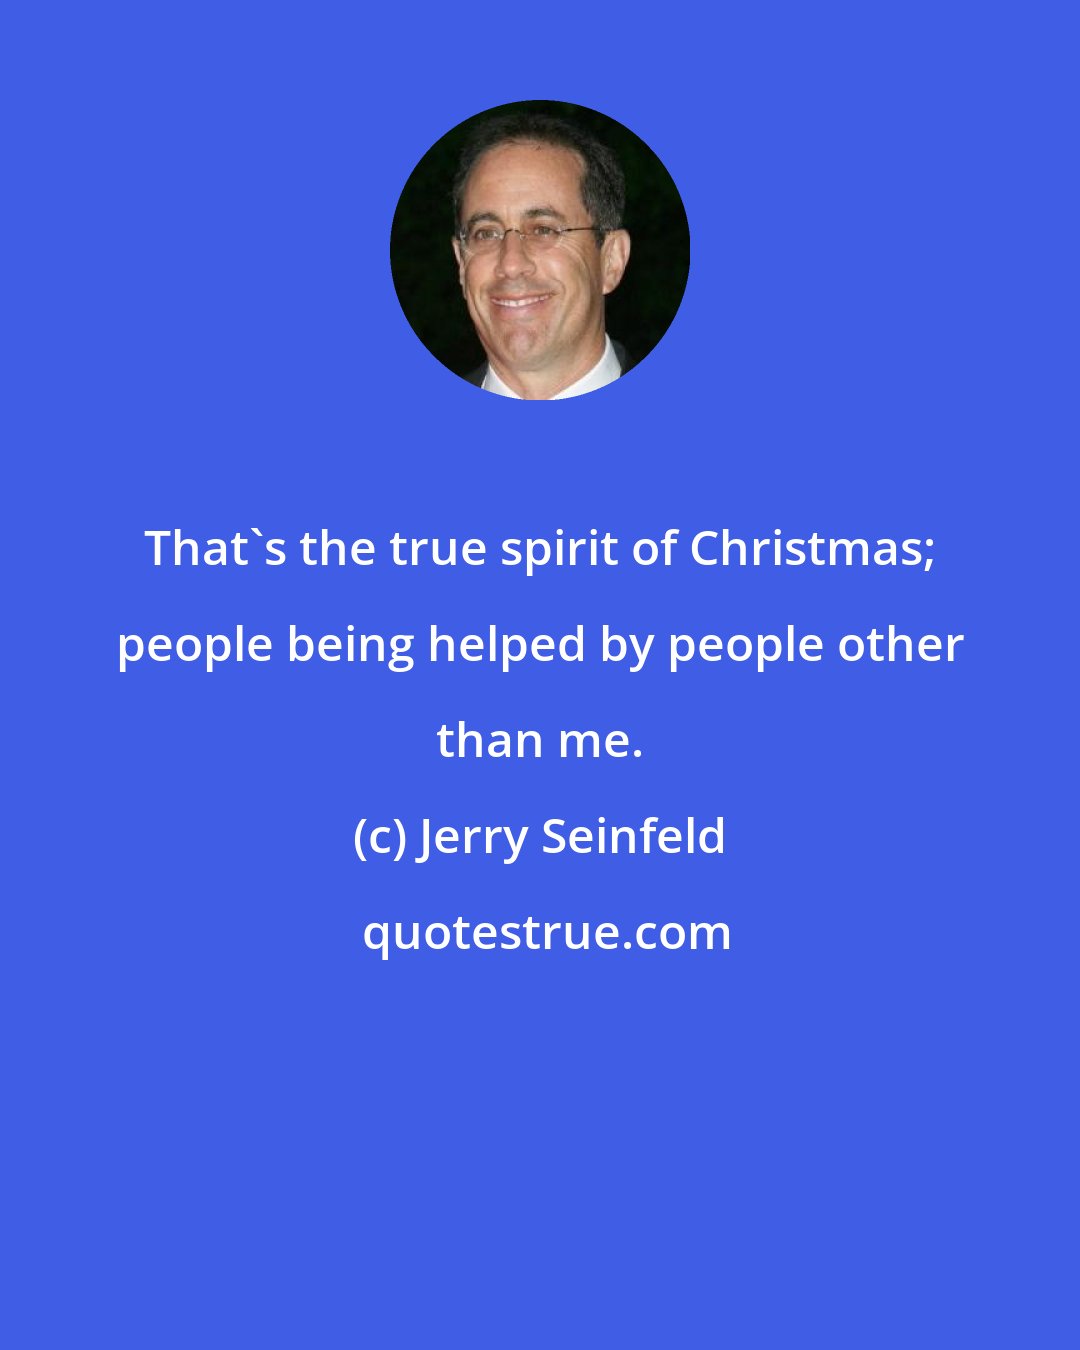 Jerry Seinfeld: That's the true spirit of Christmas; people being helped by people other than me.